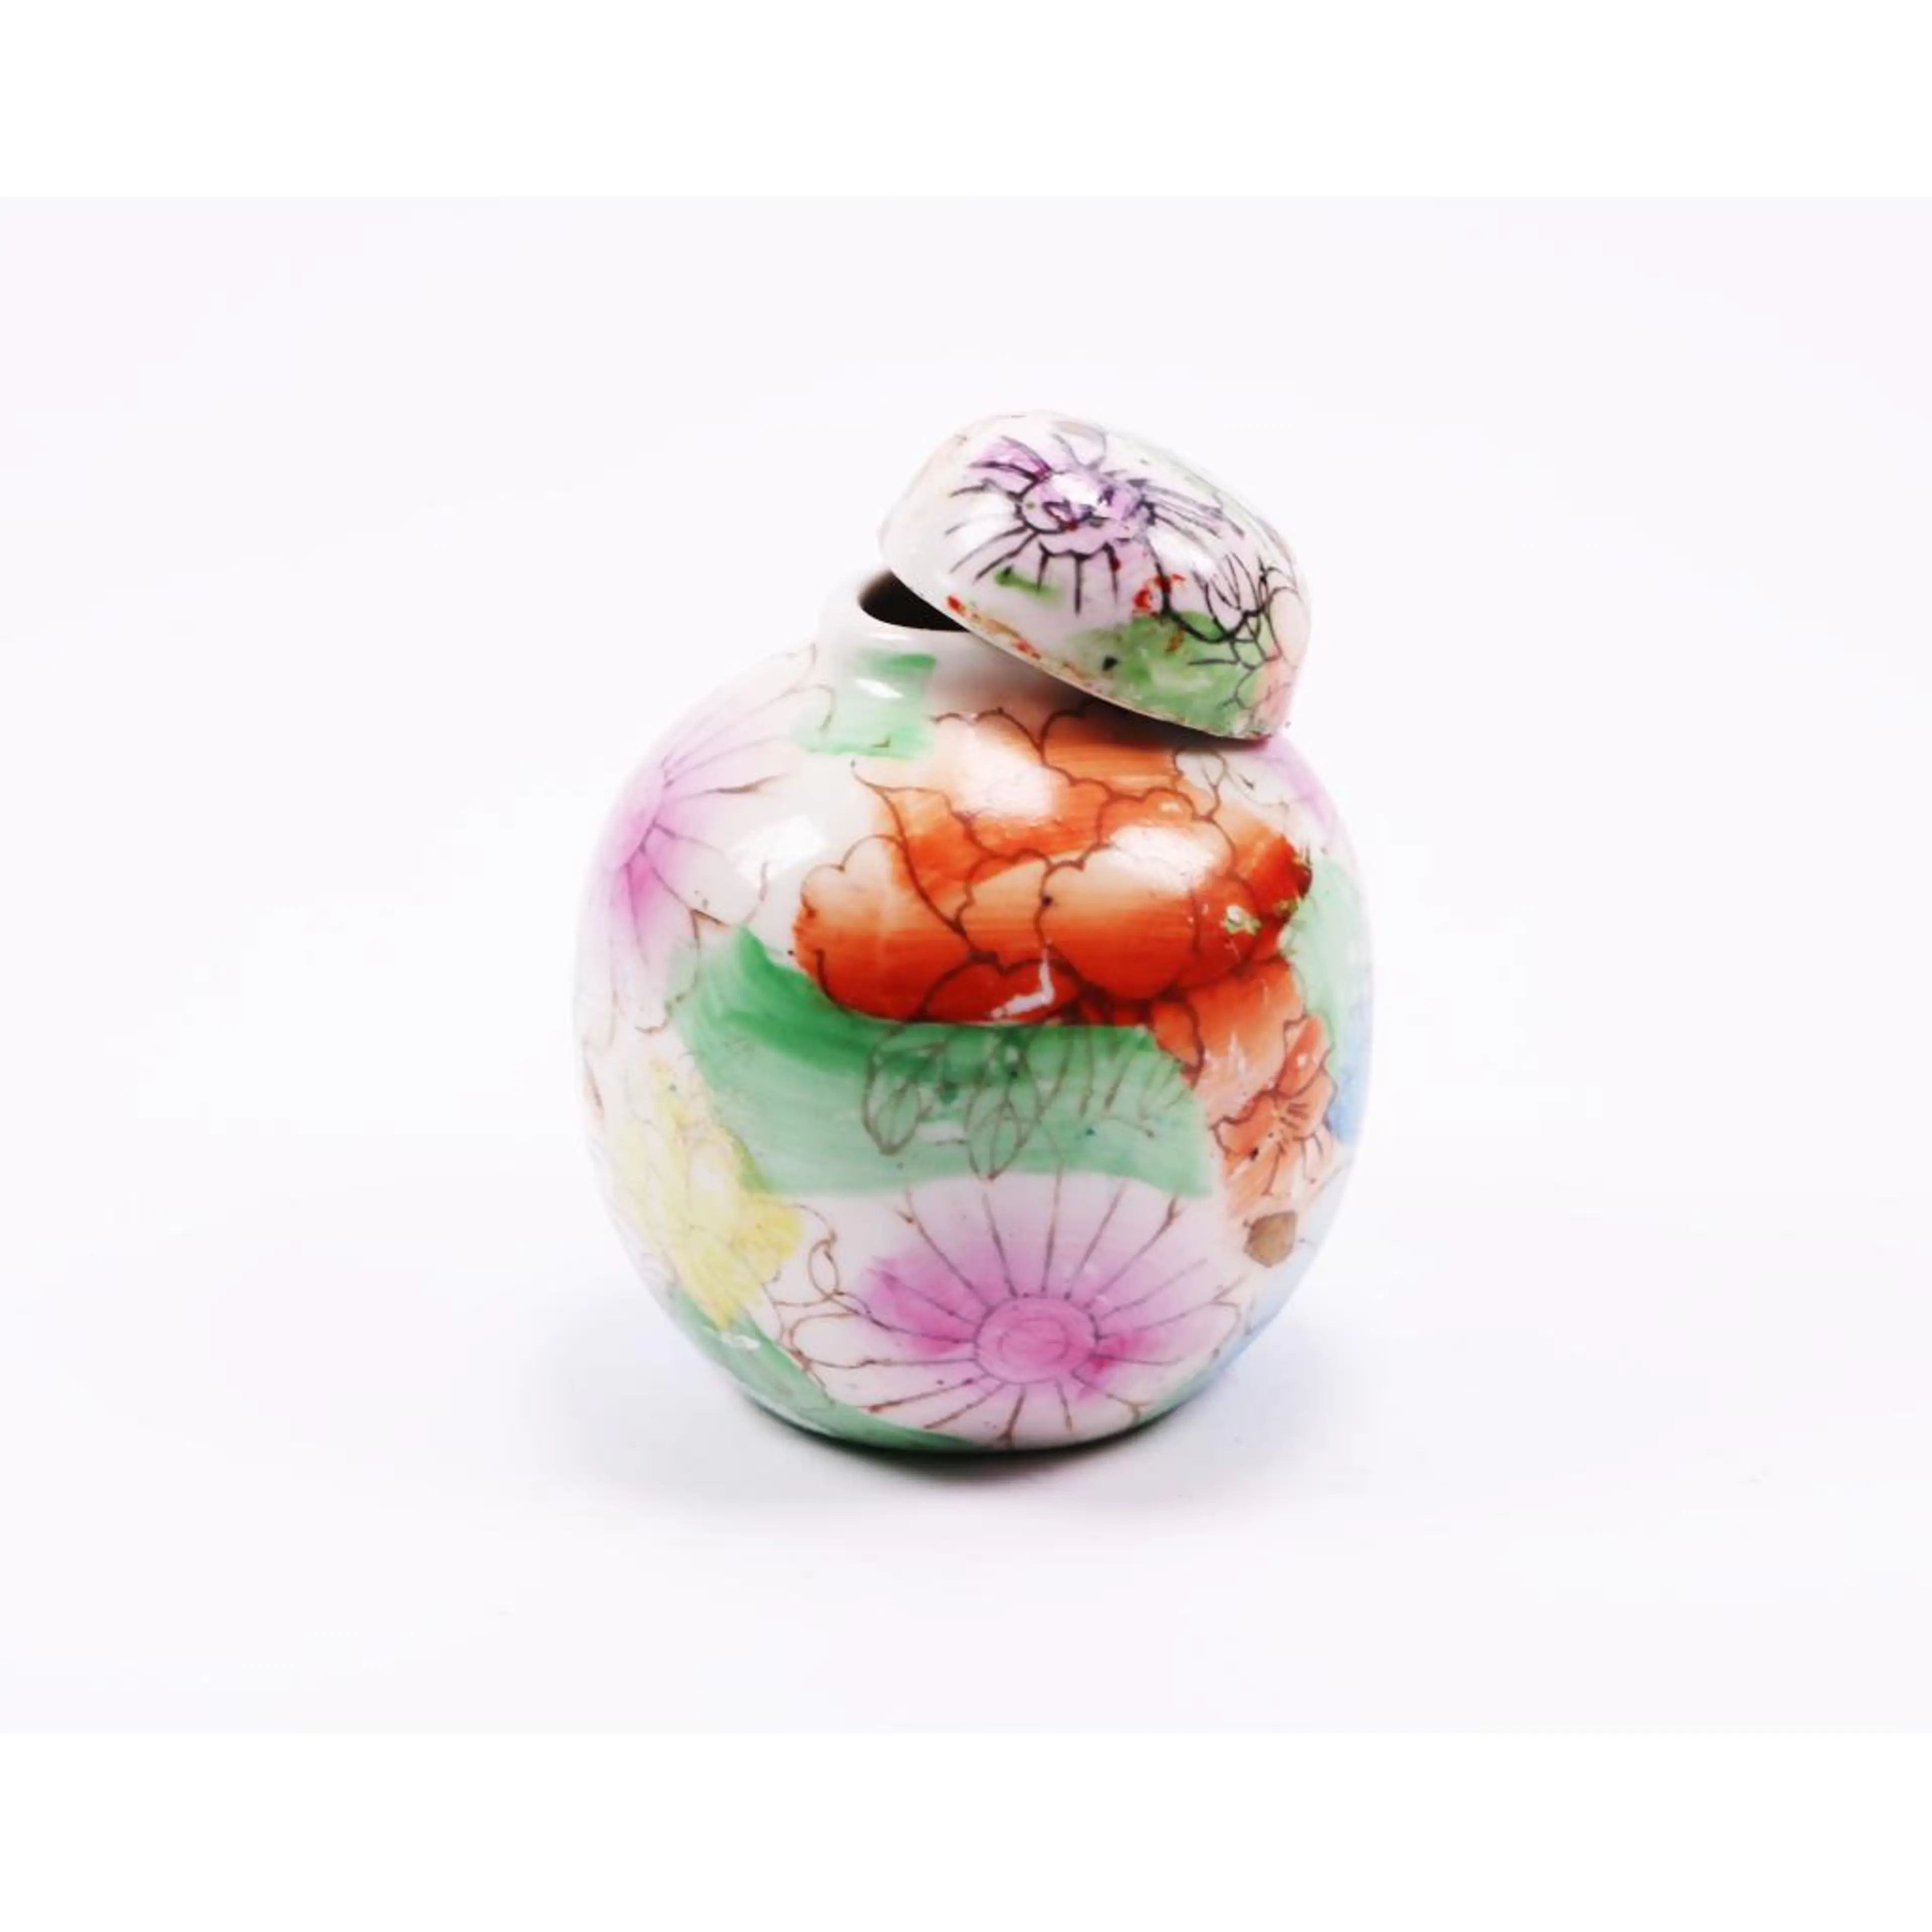 Vintage Chinese Porcelain Hand-Painted Ginger Jar With Floral Decoration